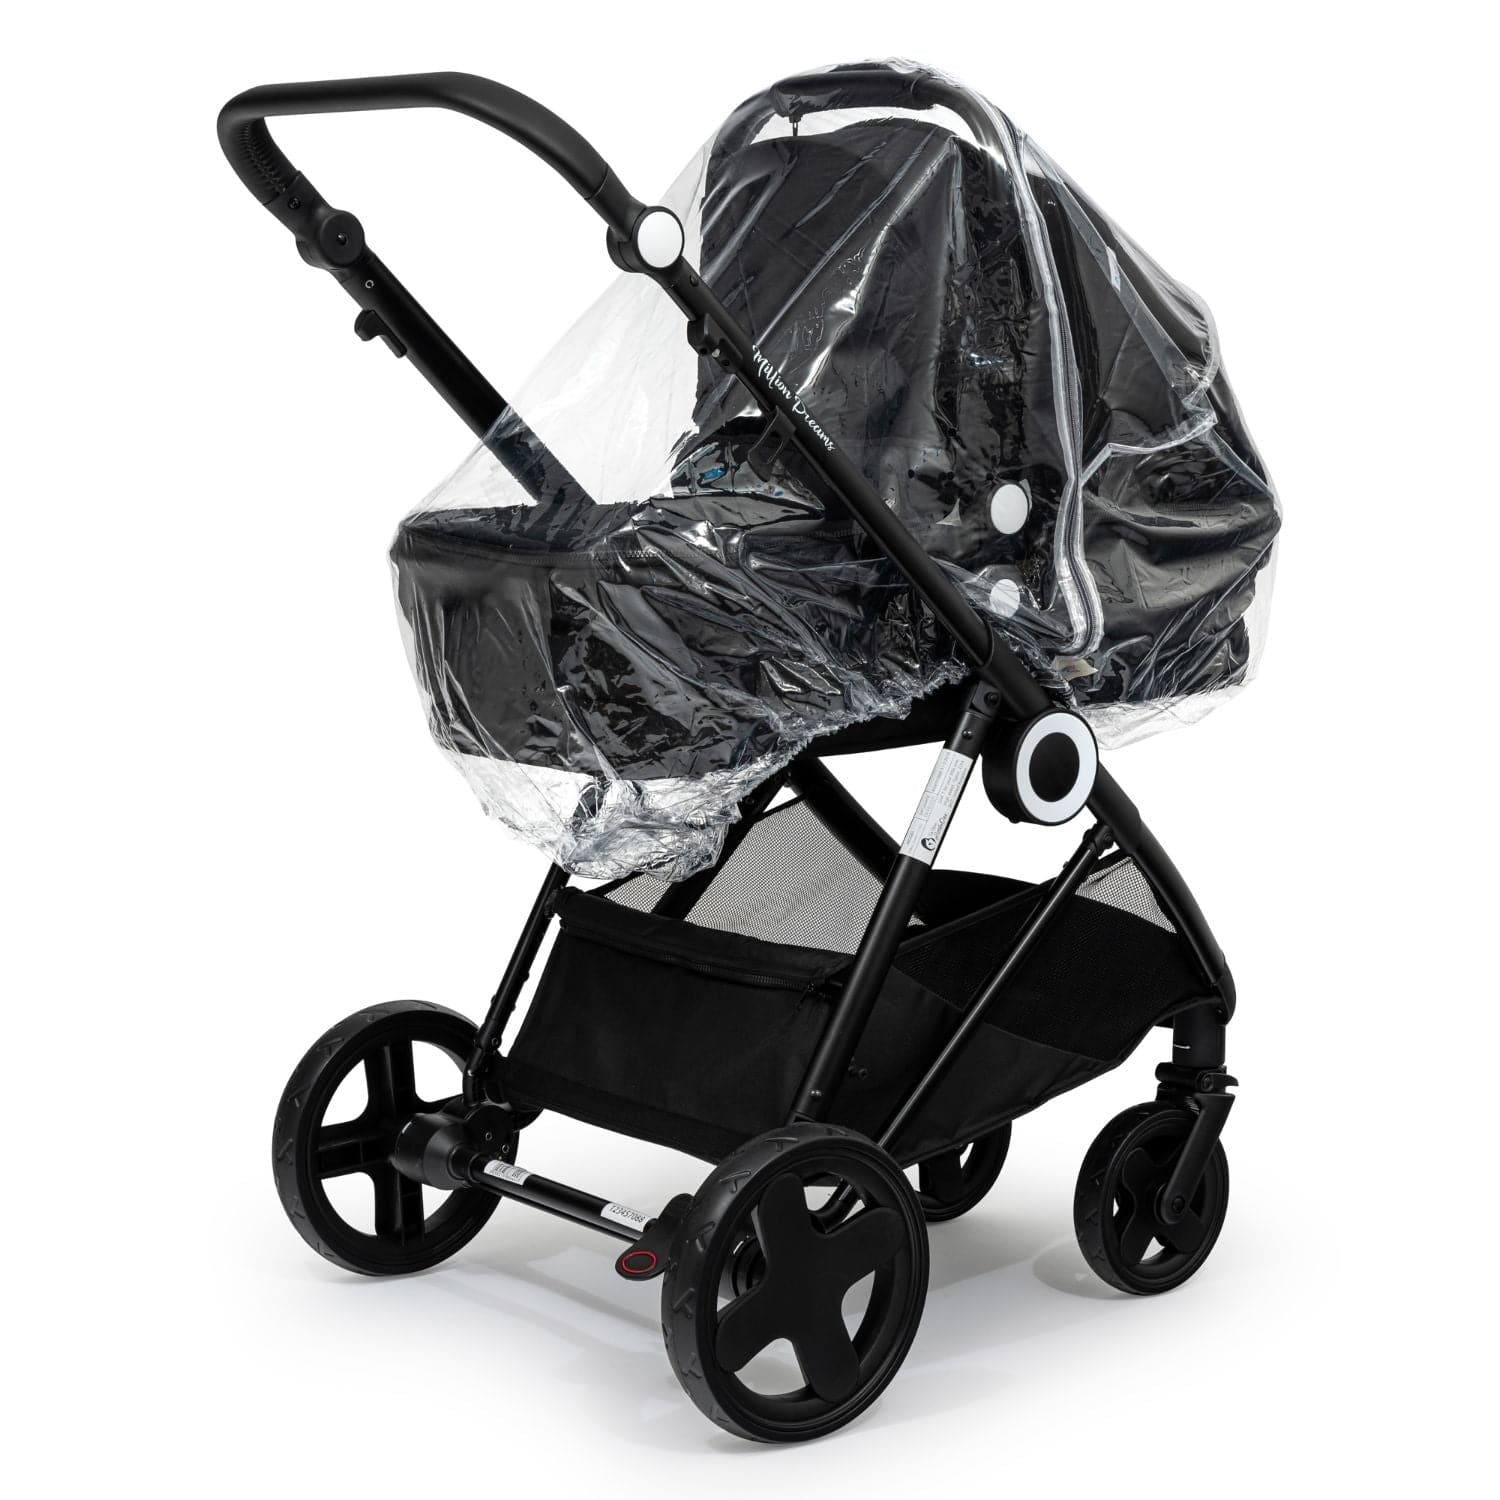 Carrycot Raincover Compatible With Noukies - Fits All Models - For Your Little One